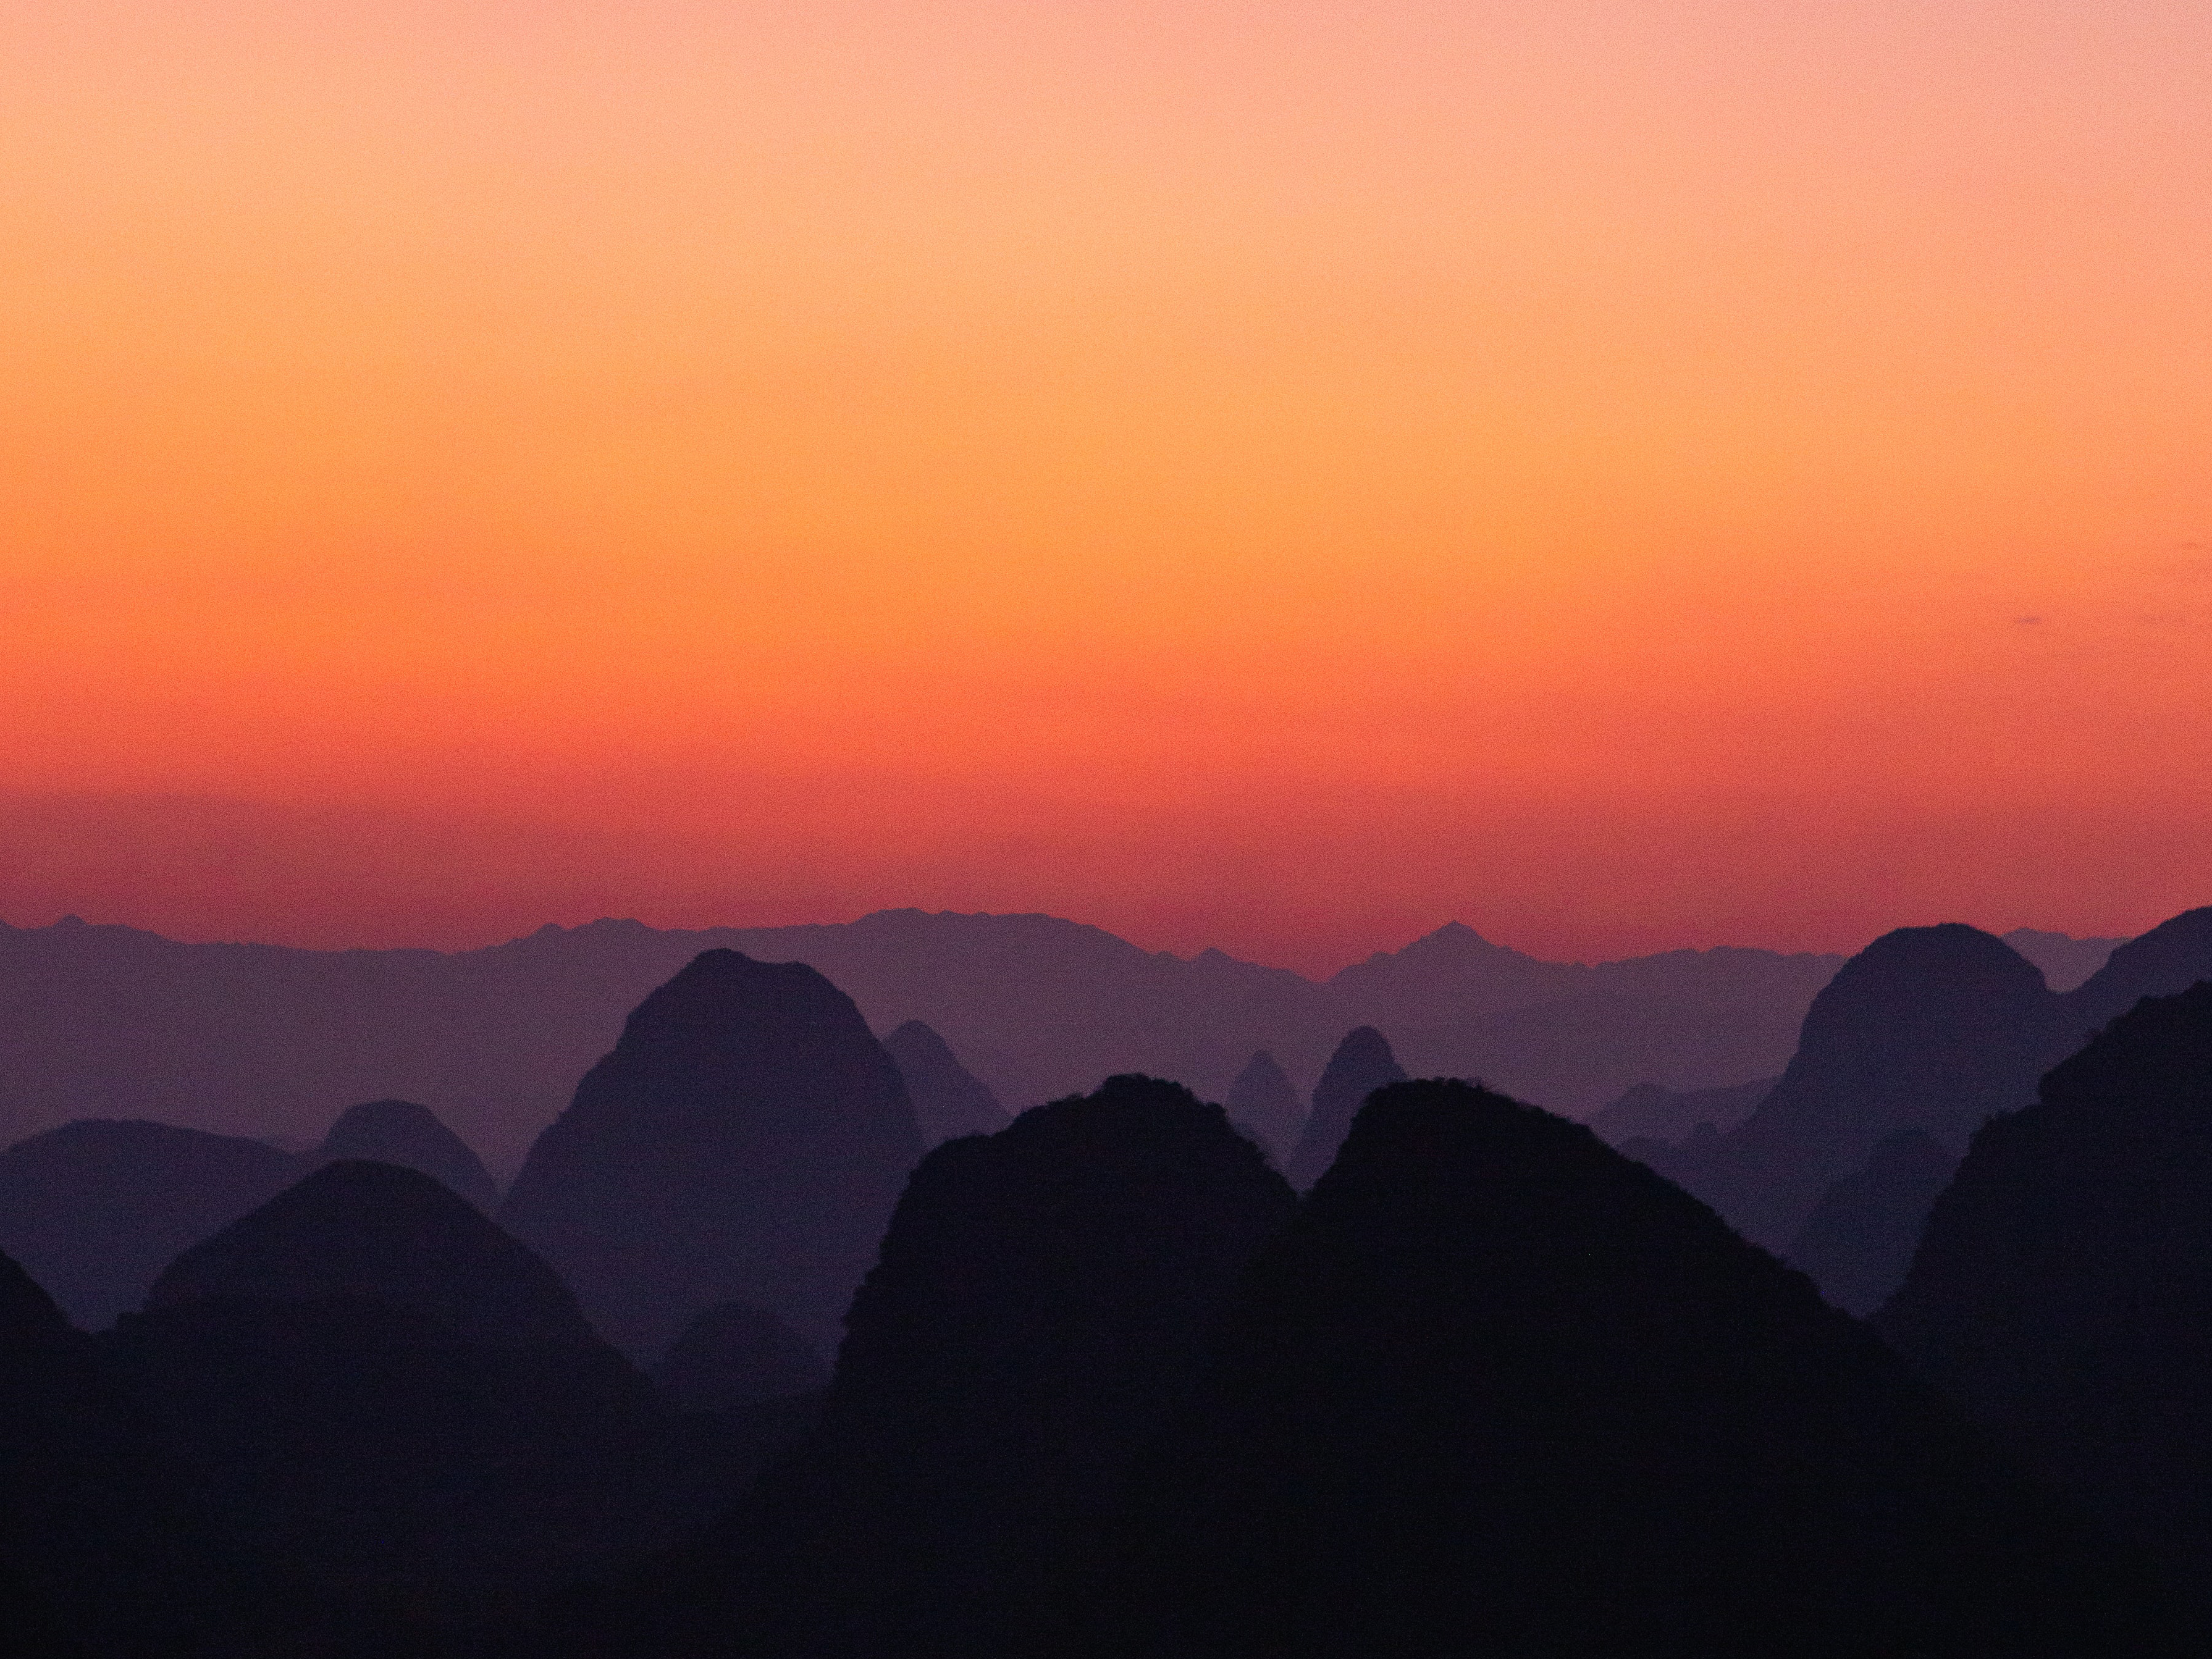 A scenic view of mountains during a sunset